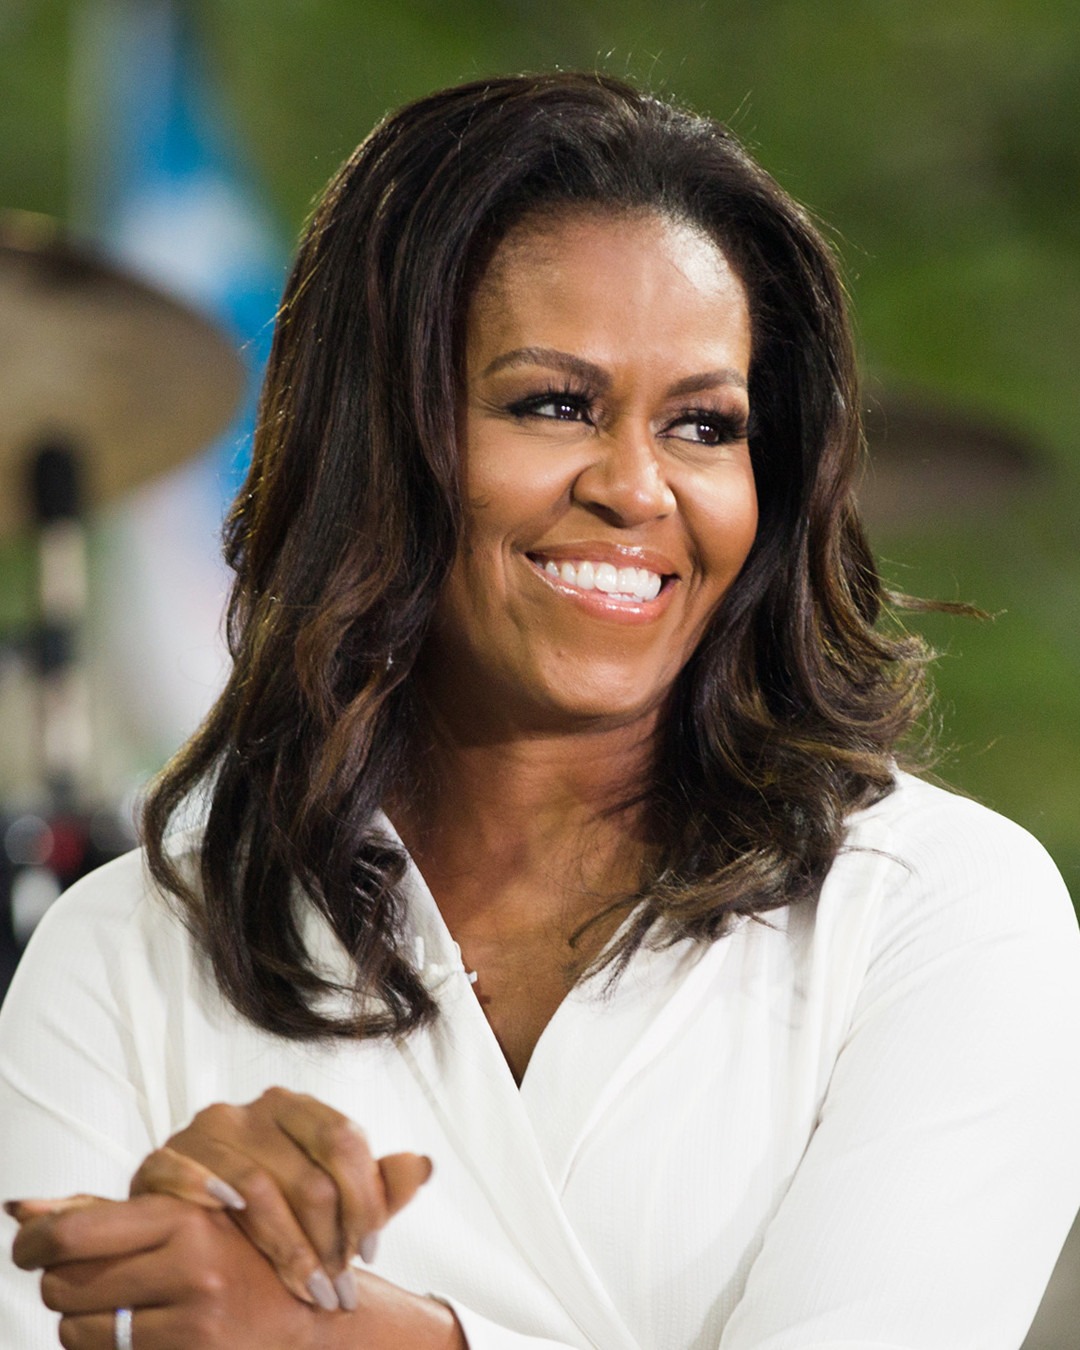 Michelle Obama Stuns With Curly Hair and Shares Why She’s Getting Real With Women ...